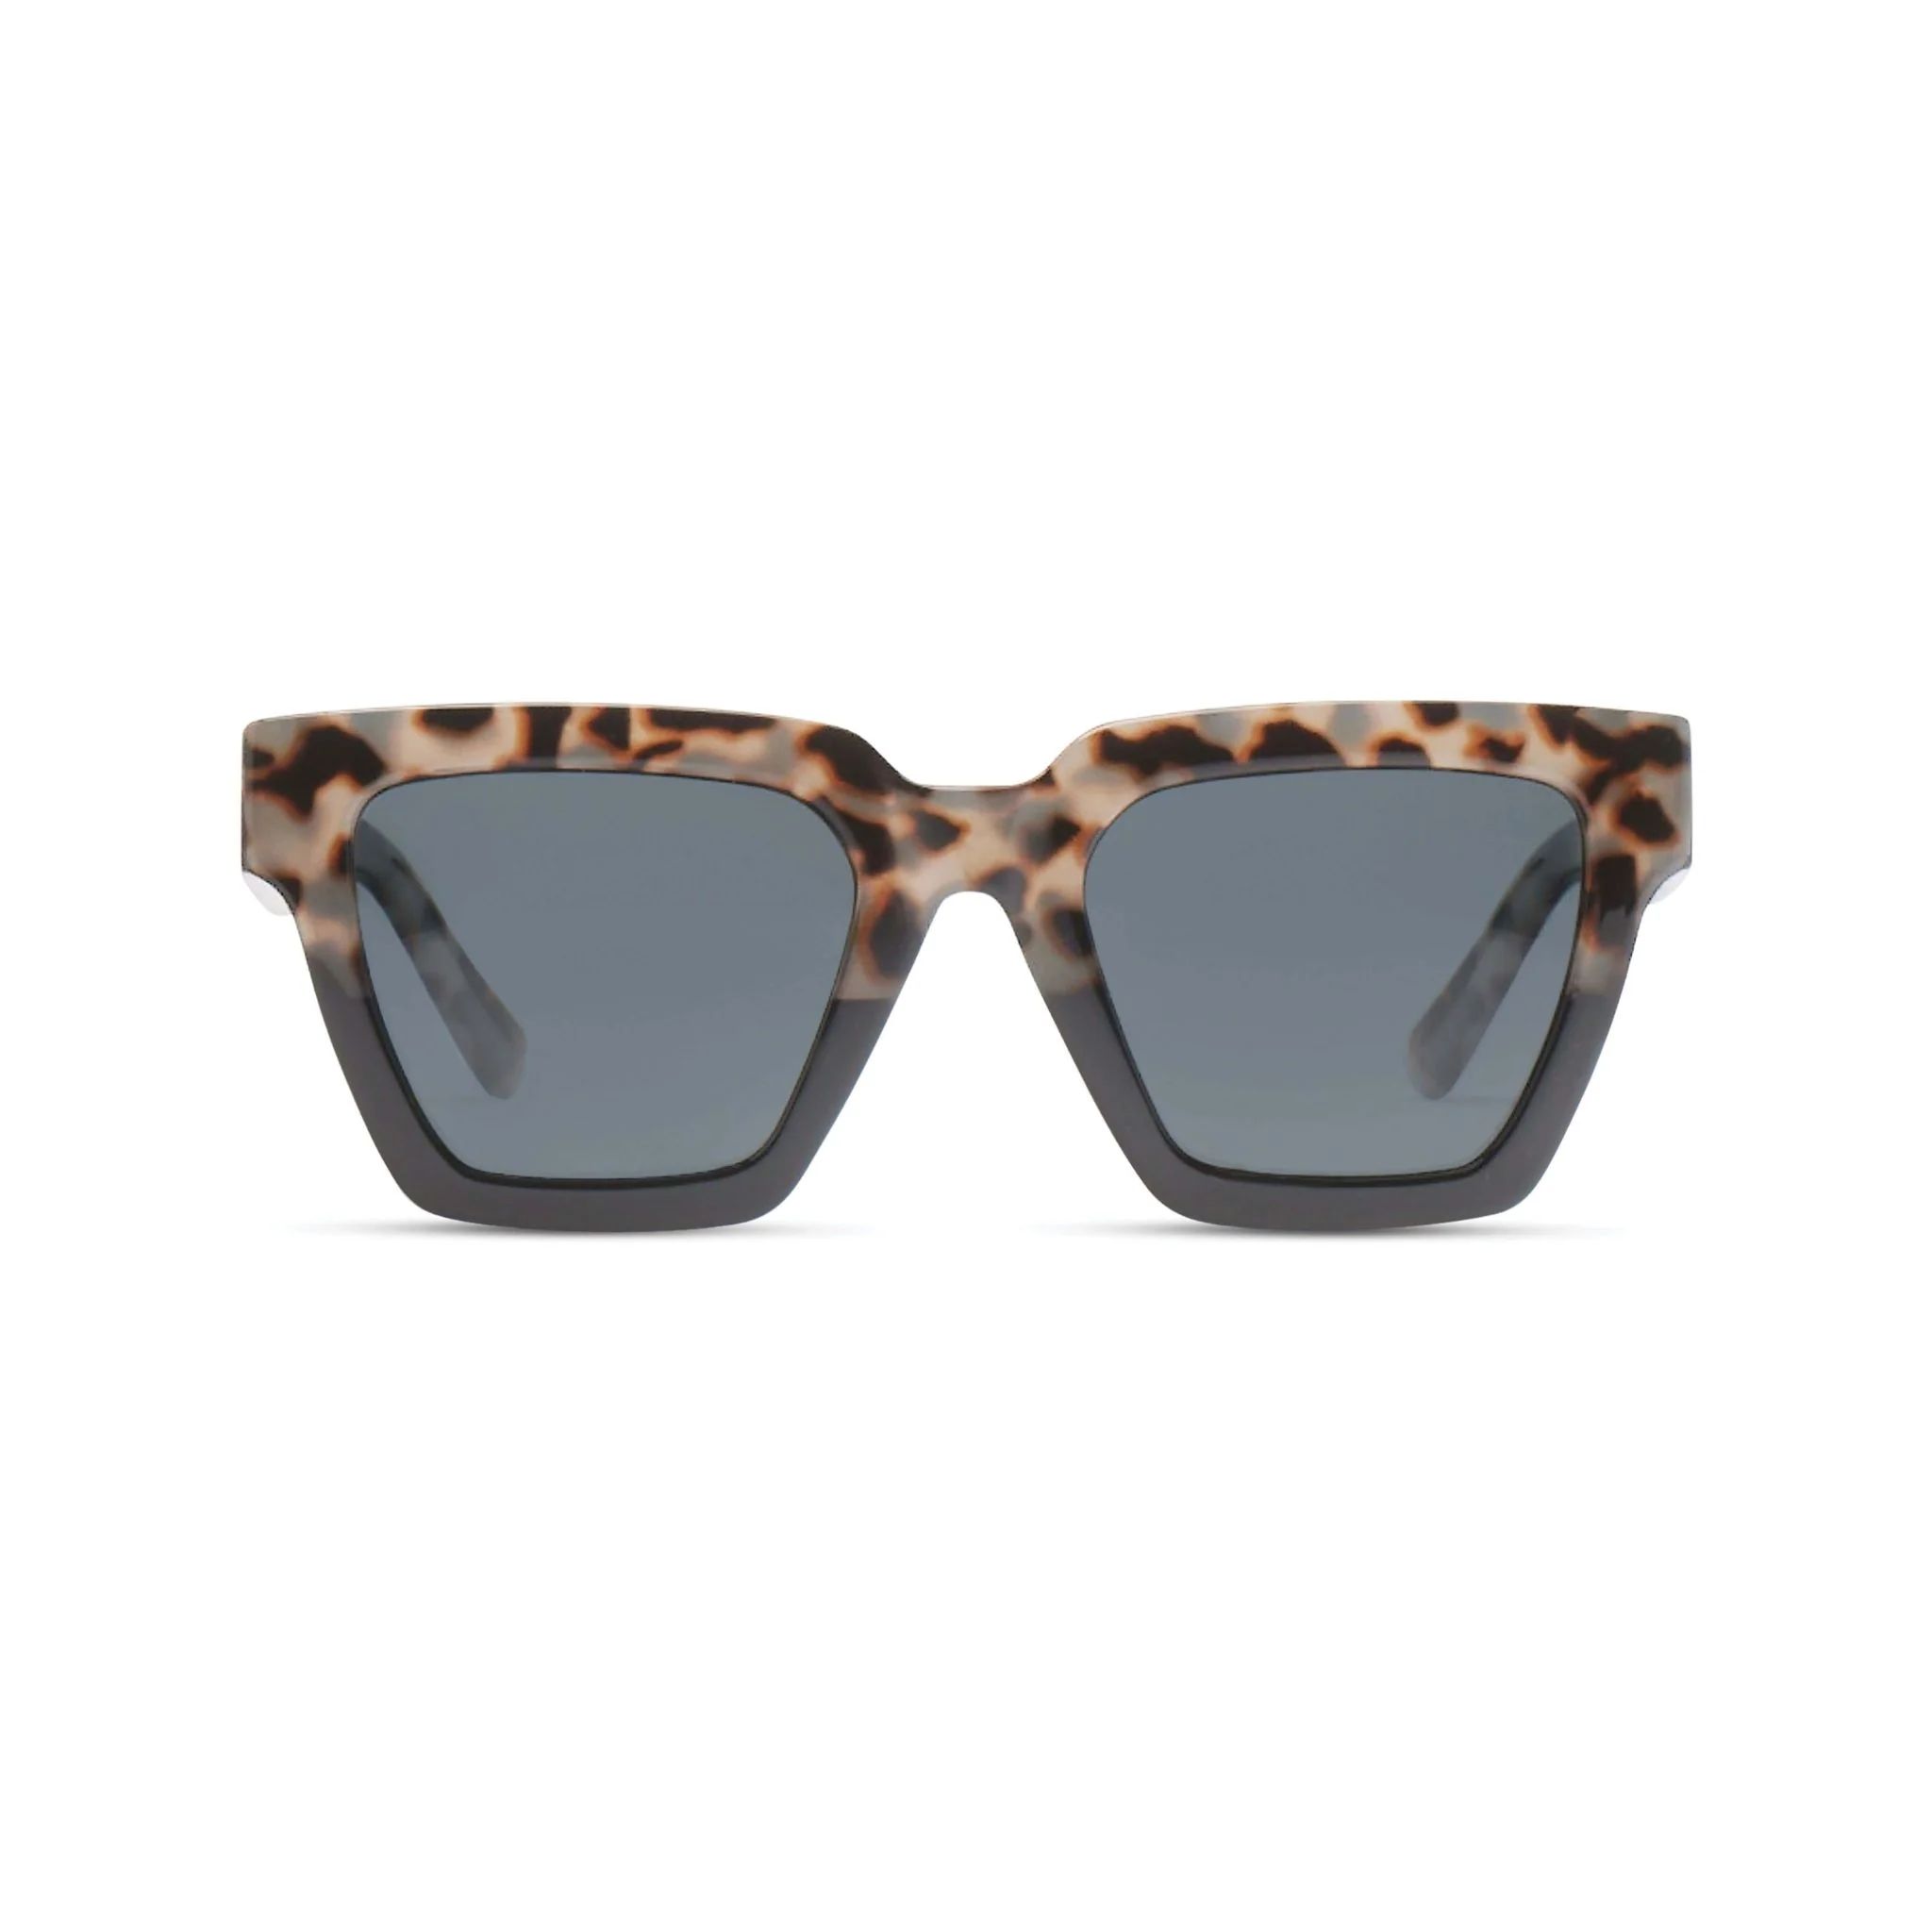 Out of Office (Sunglasses) - Peepers by PeeperSpecs | Peepers